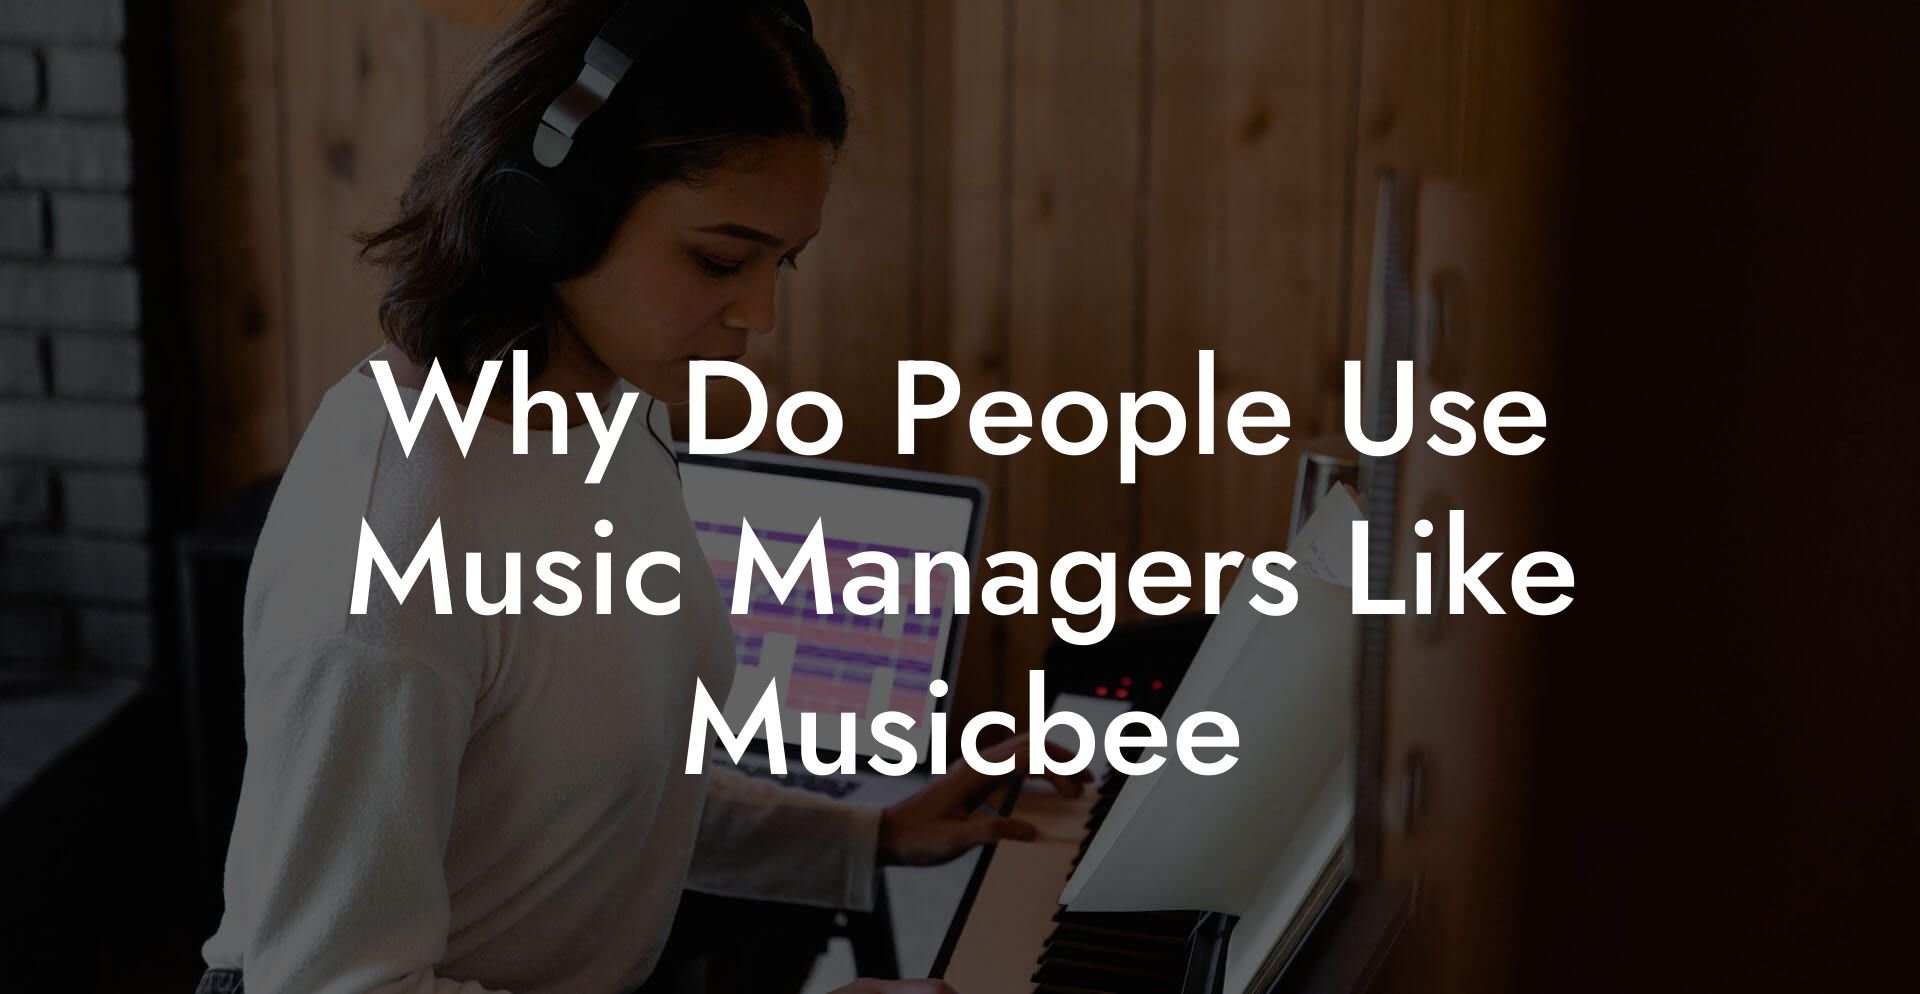 Why Do People Use Music Managers Like Musicbee